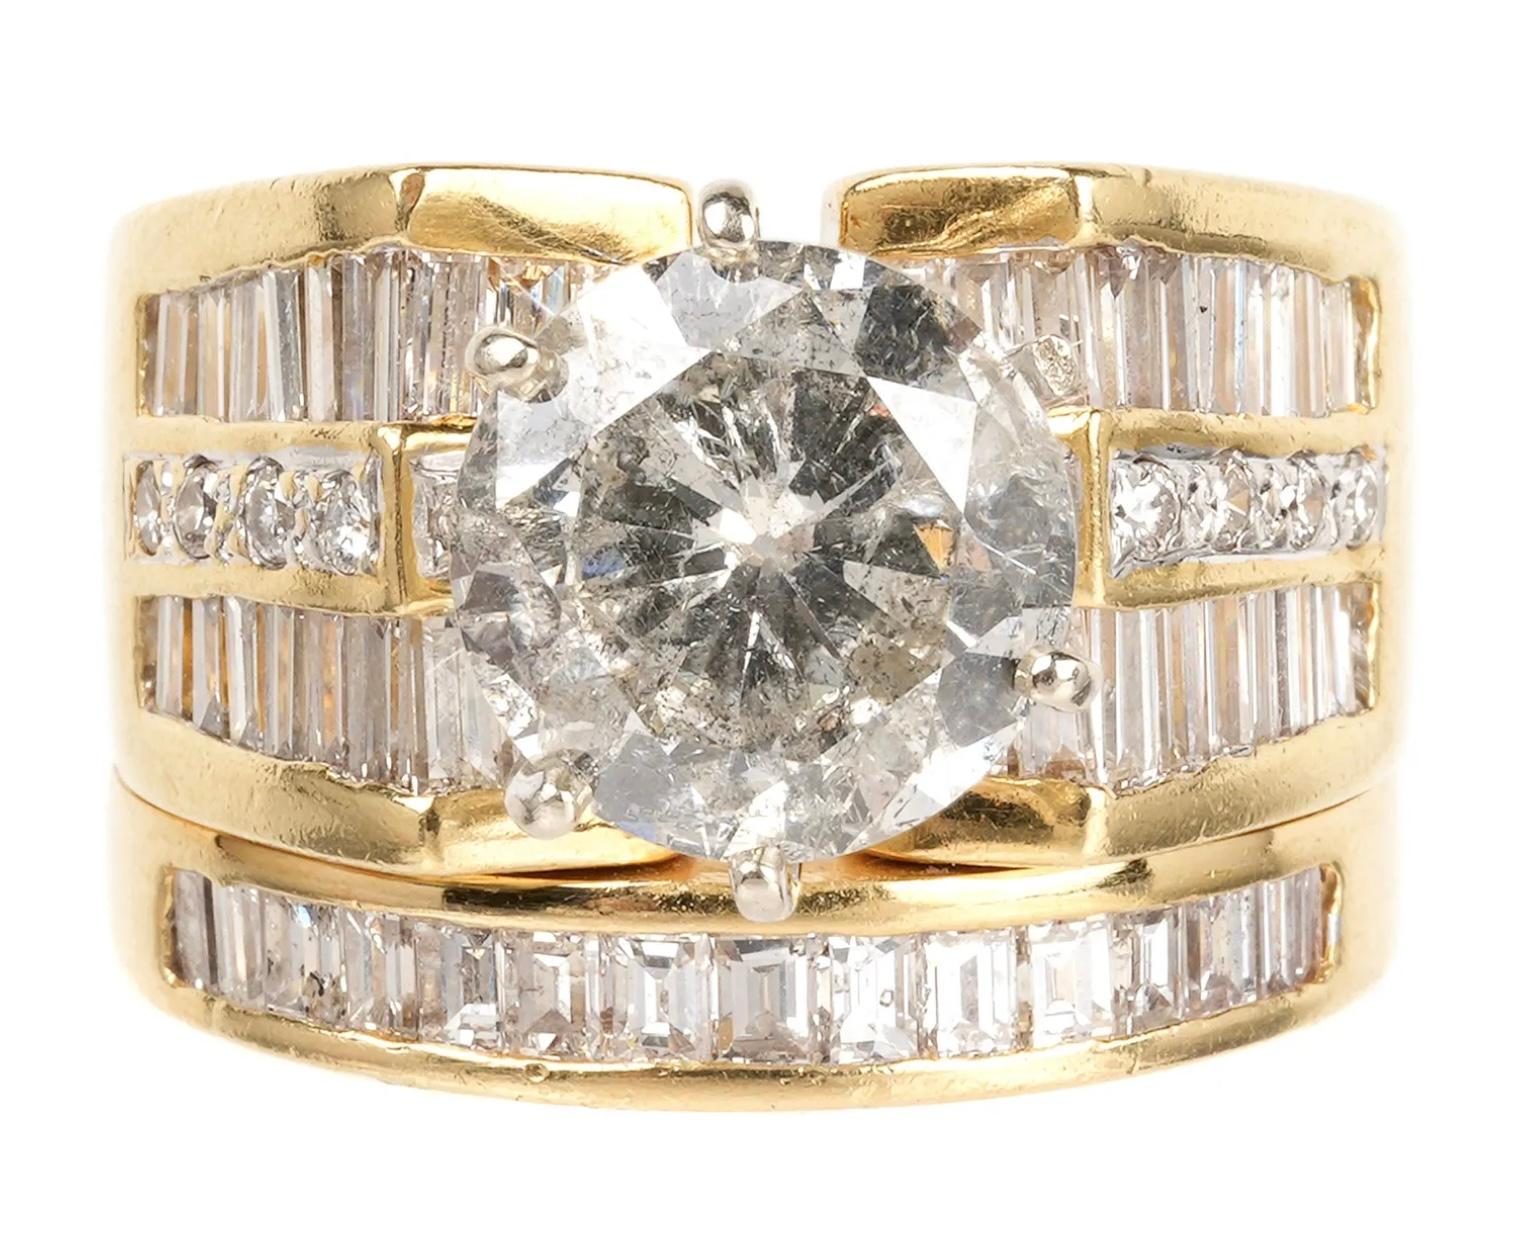 Stunning 18k yellow gold with 5.91 ctw diamond bridal set, size 6.5, that includes:
1) Engagement ring prong set center diamond, approx. 3.15cts, I2 clarity, J in color.  36 channel set baguette diamonds, total approx. 2.16ctw, VS-2 to SI1 in